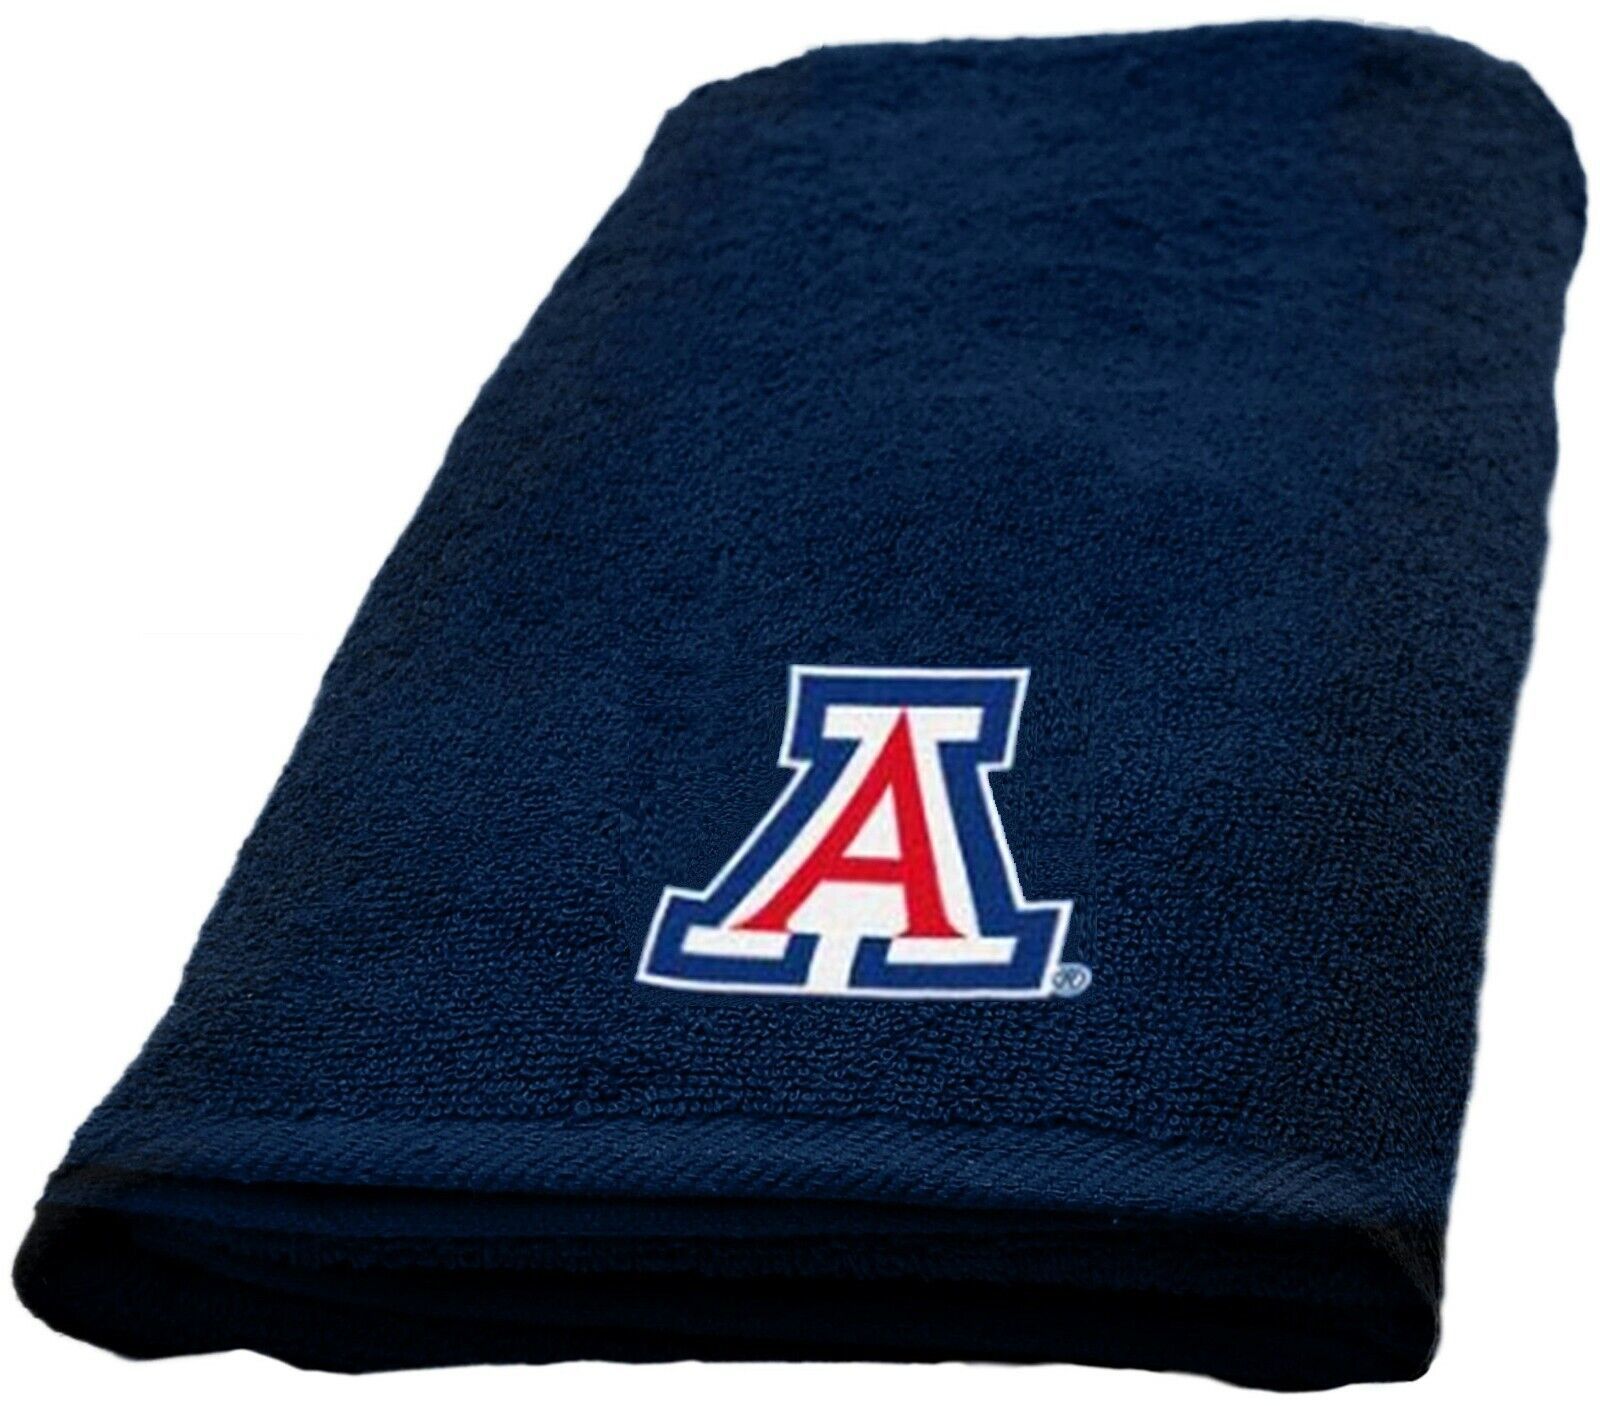 Northwest Arizona Wildcats Hand Towel dimensions are 15 x 26 inches - $18.76